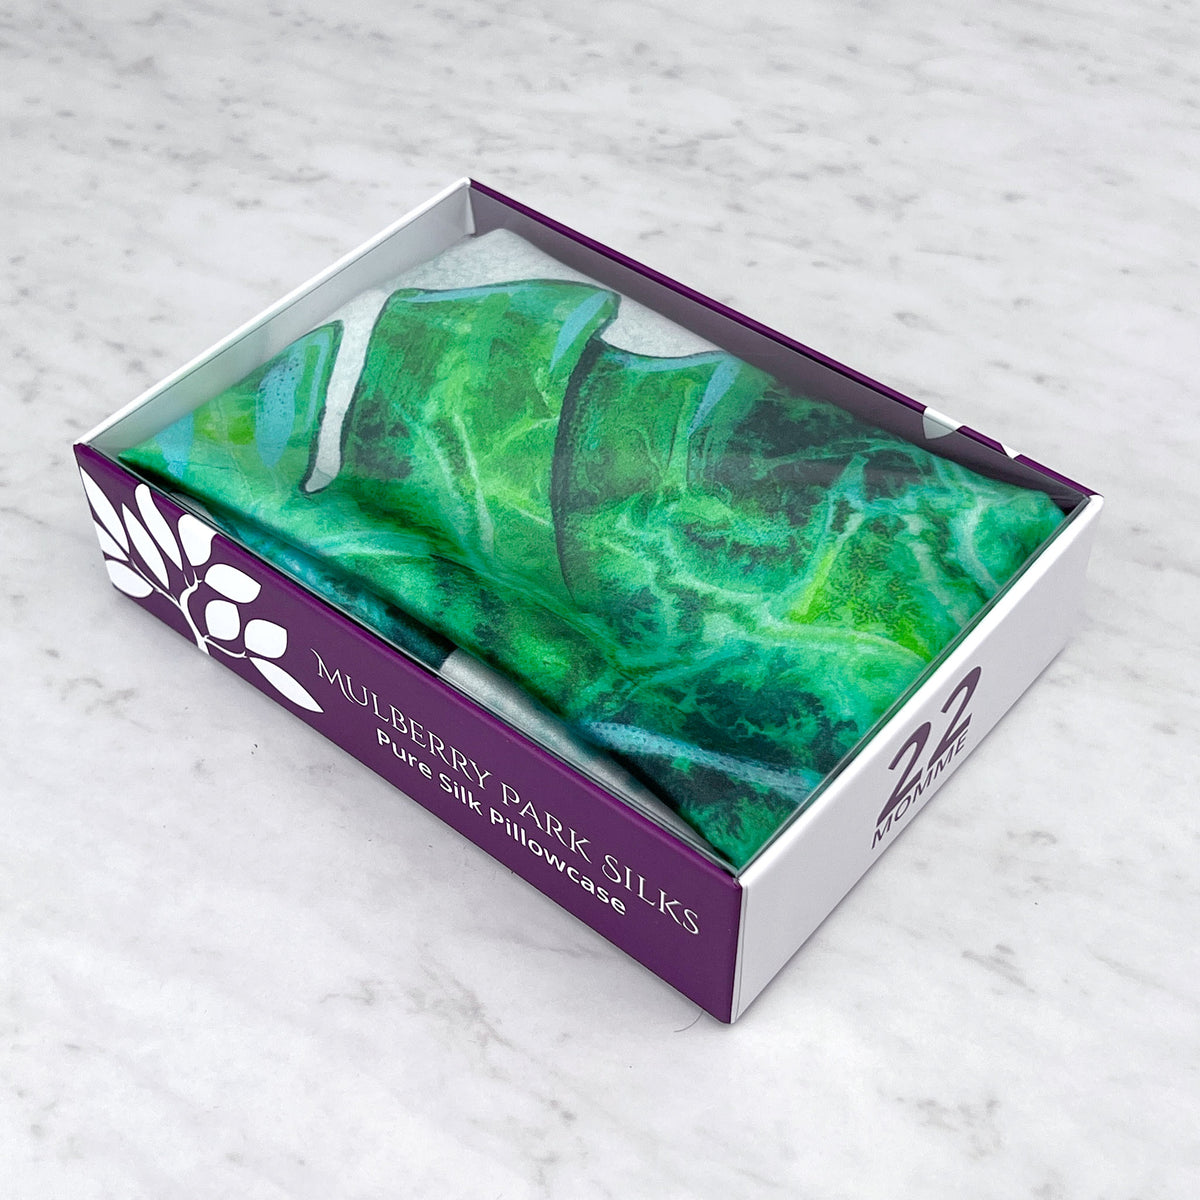 Tropical Palms Silk Pillowcase from Mulberry Park Silks in a box